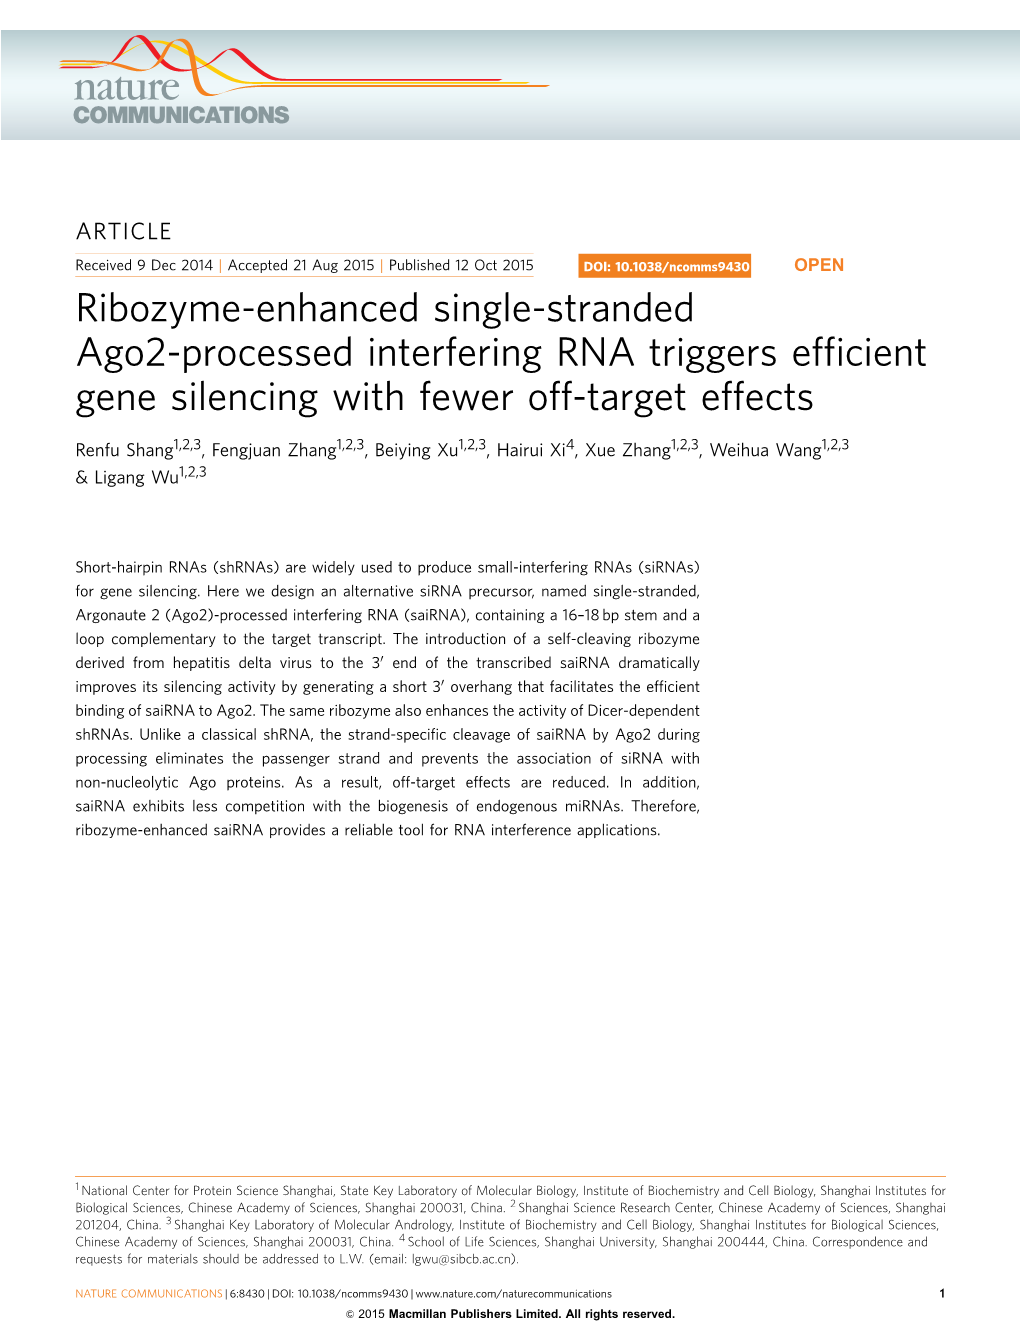 Ribozyme-Enhanced Single-Stranded Ago2-Processed Interfering RNA Triggers Efﬁcient Gene Silencing with Fewer Off-Target Effects